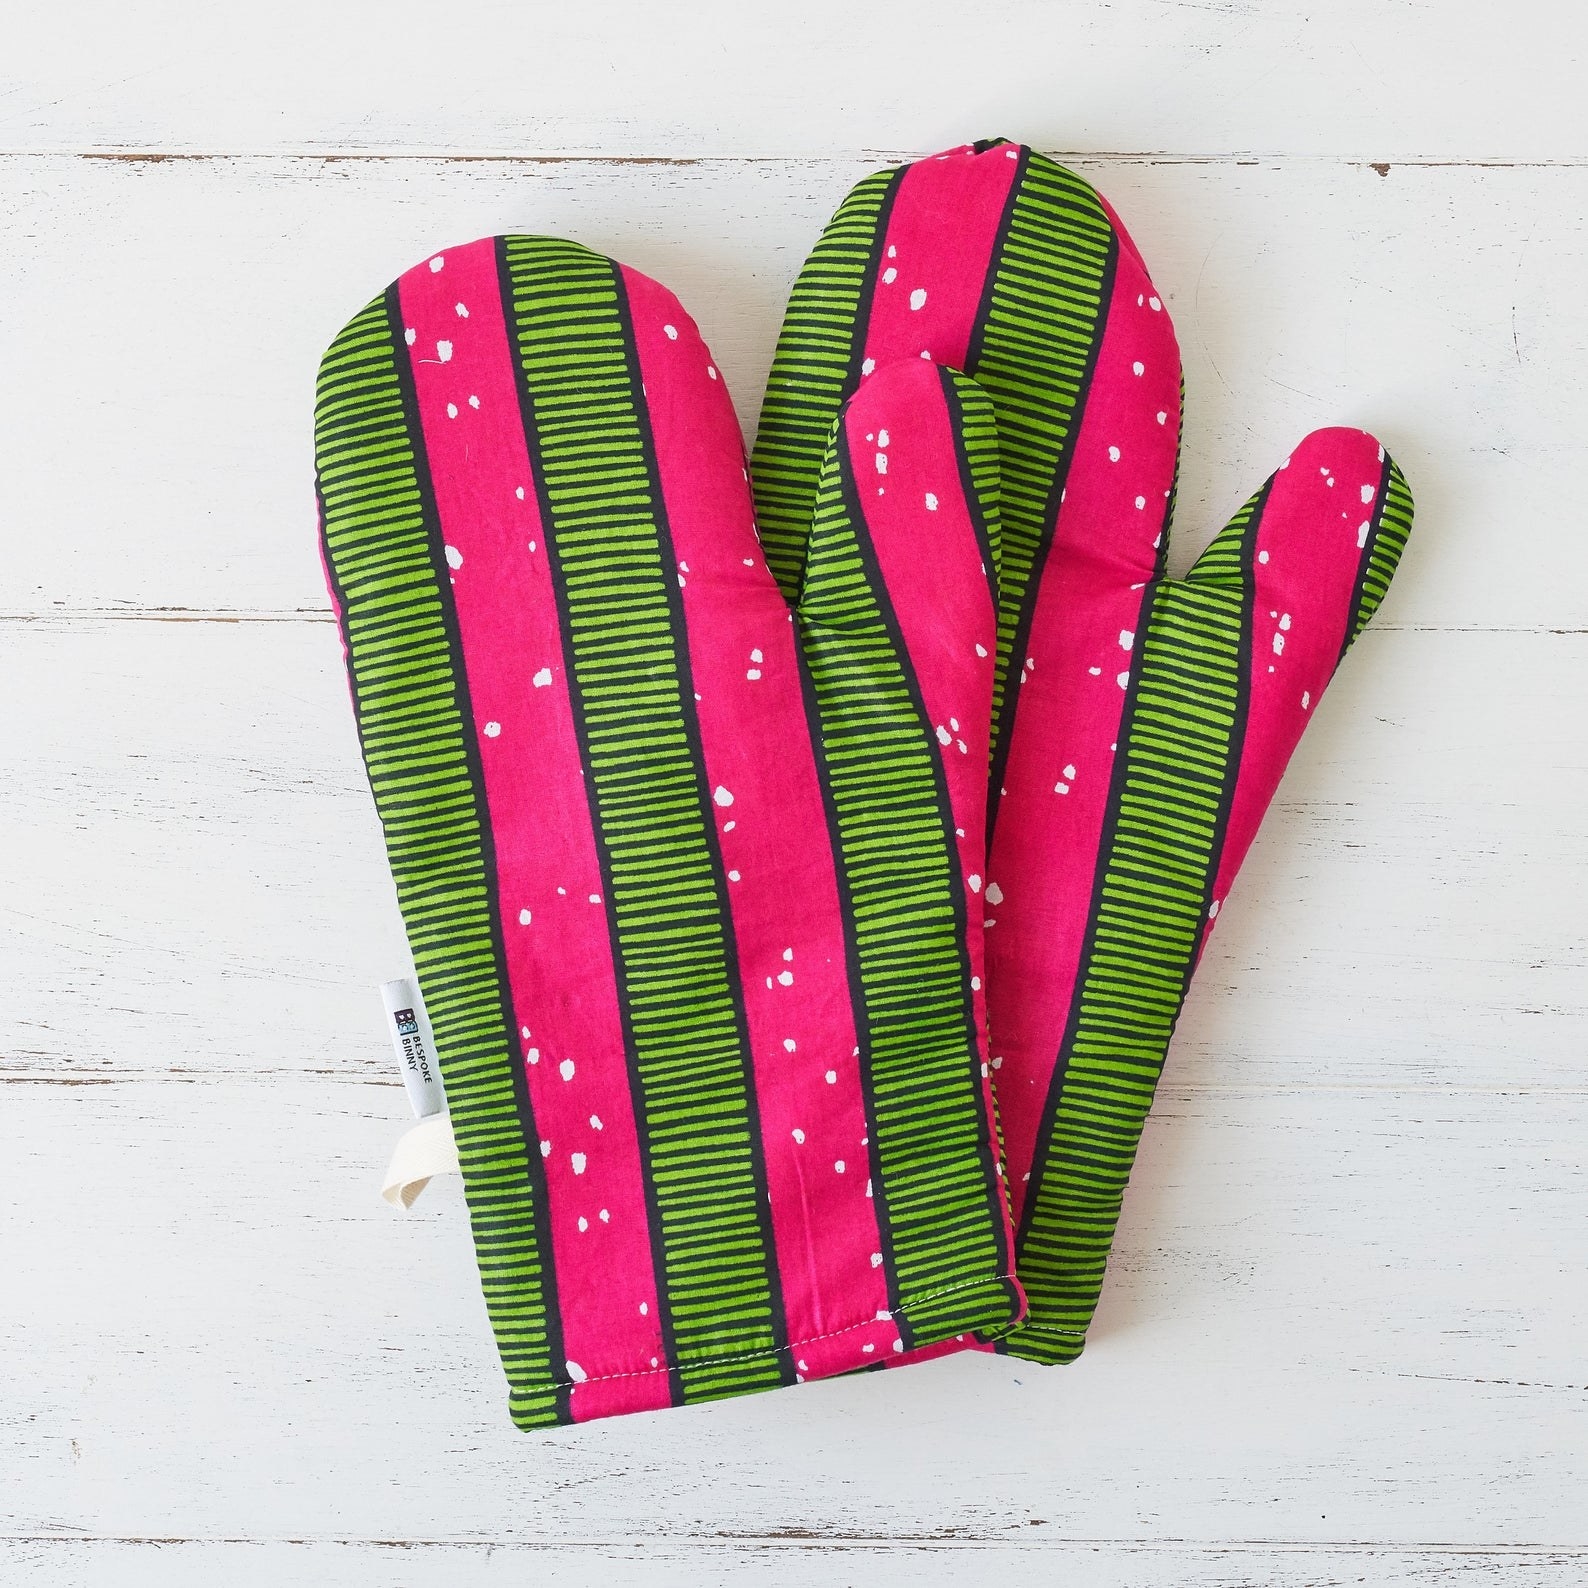 the mittens in pink and green striped print